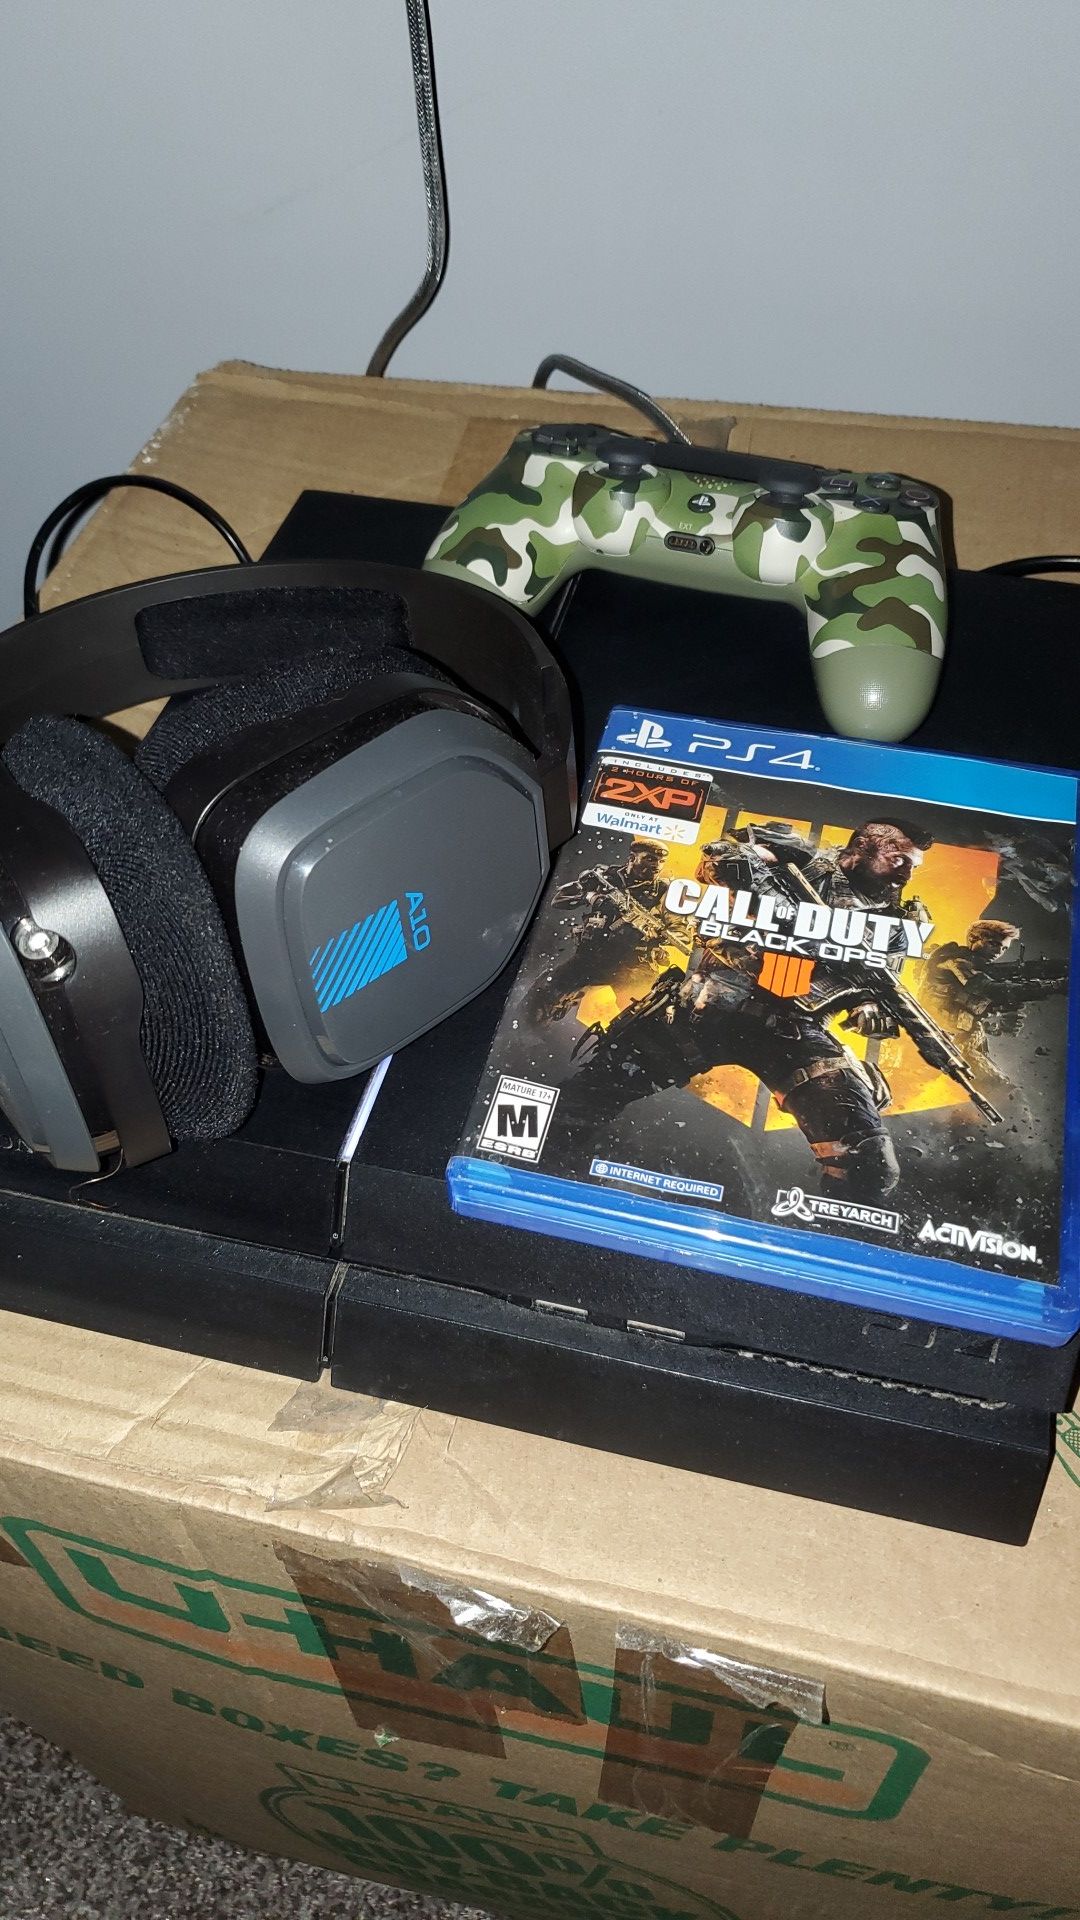 Ps4 with controller, astro 10 headset and bo4 game.